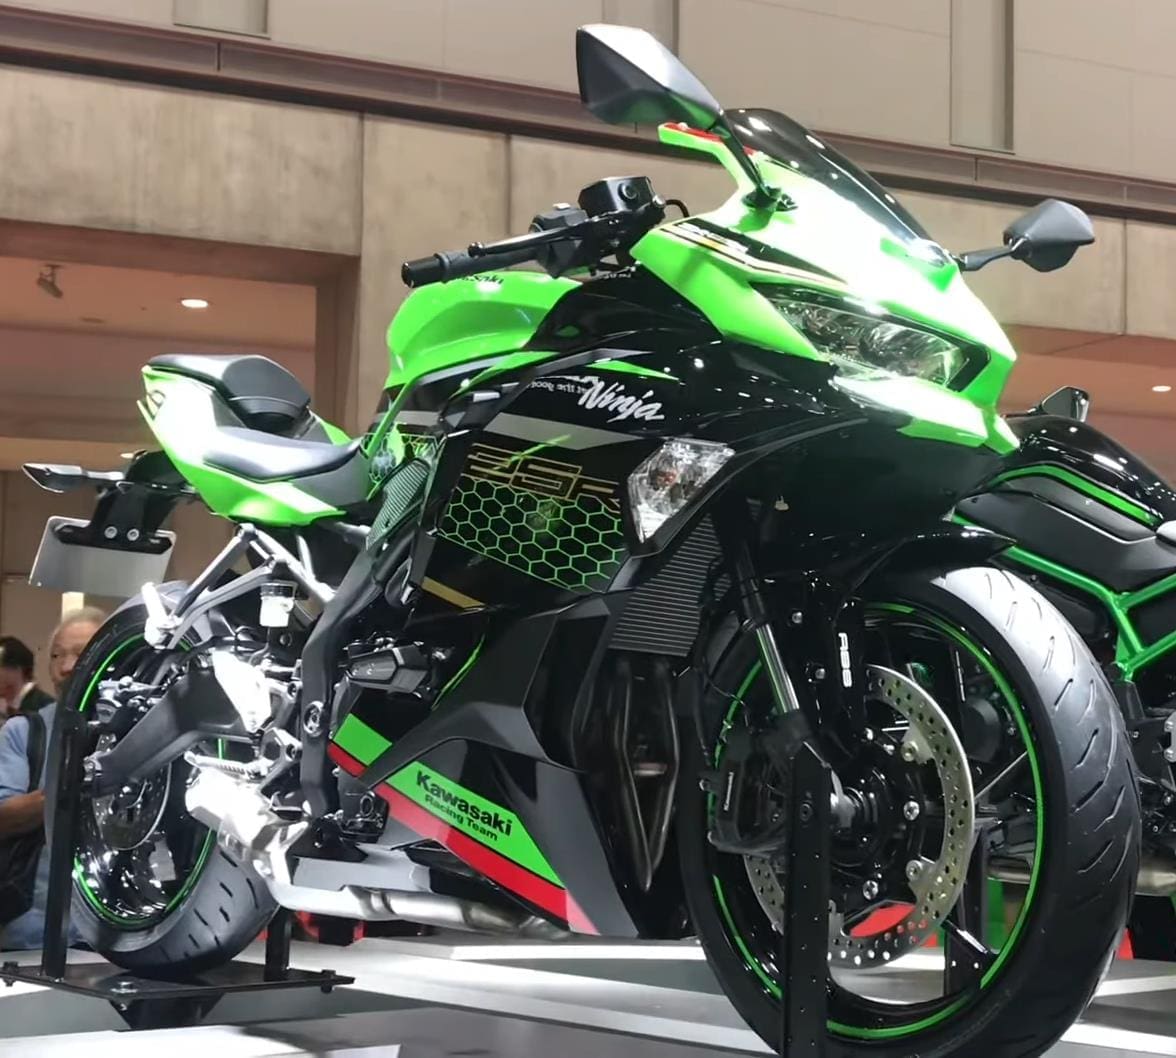 The ZX-25R baby Ninja motorcycle gets unveiled at Tokyo – gets trick bits.